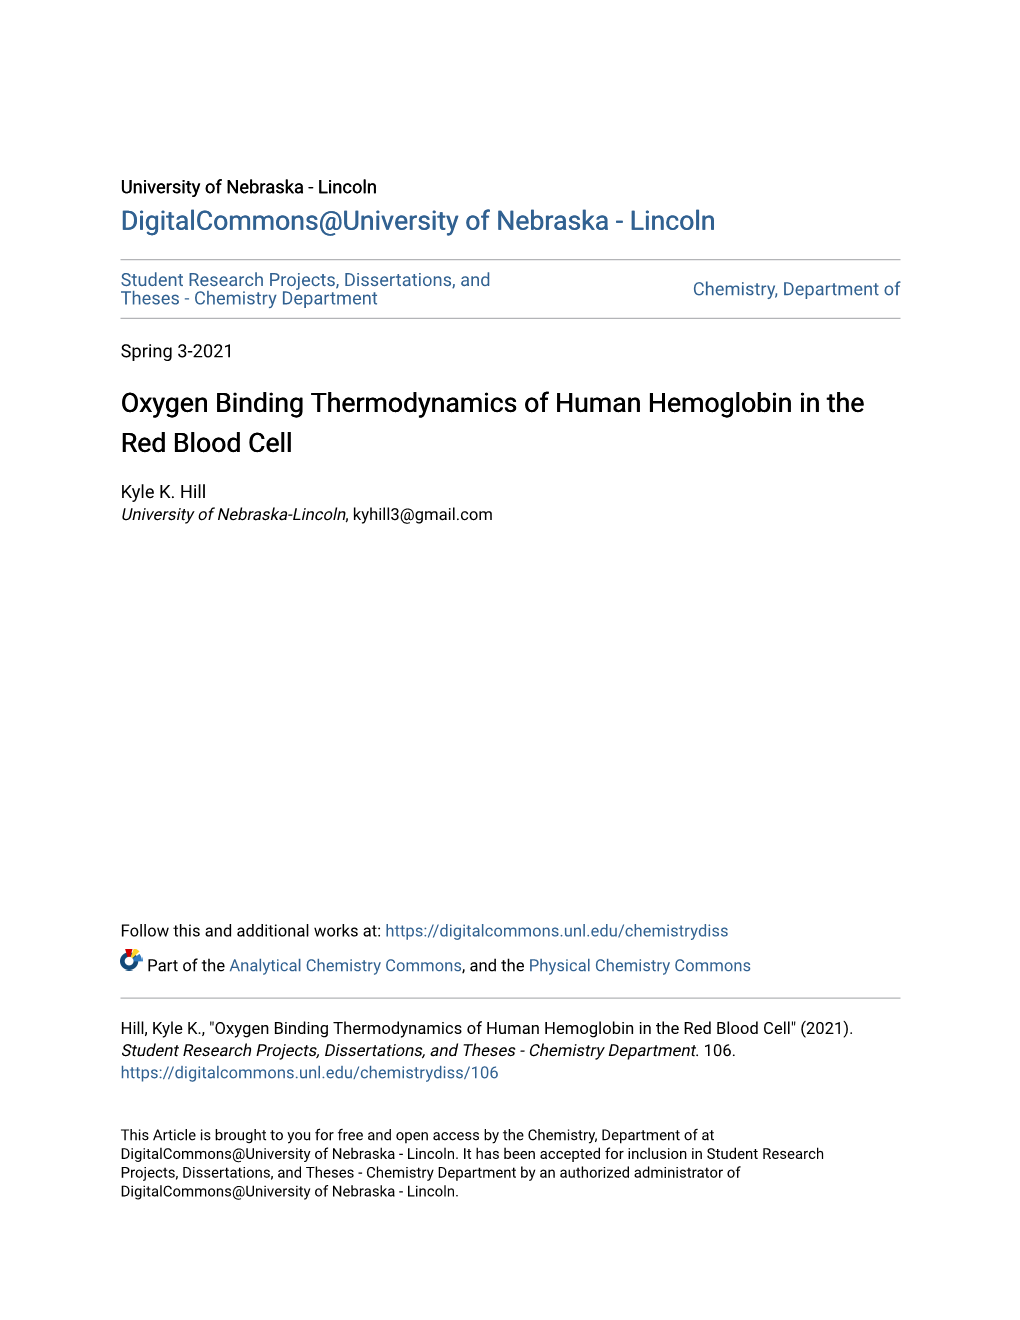 Oxygen Binding Thermodynamics of Human Hemoglobin in the Red Blood Cell